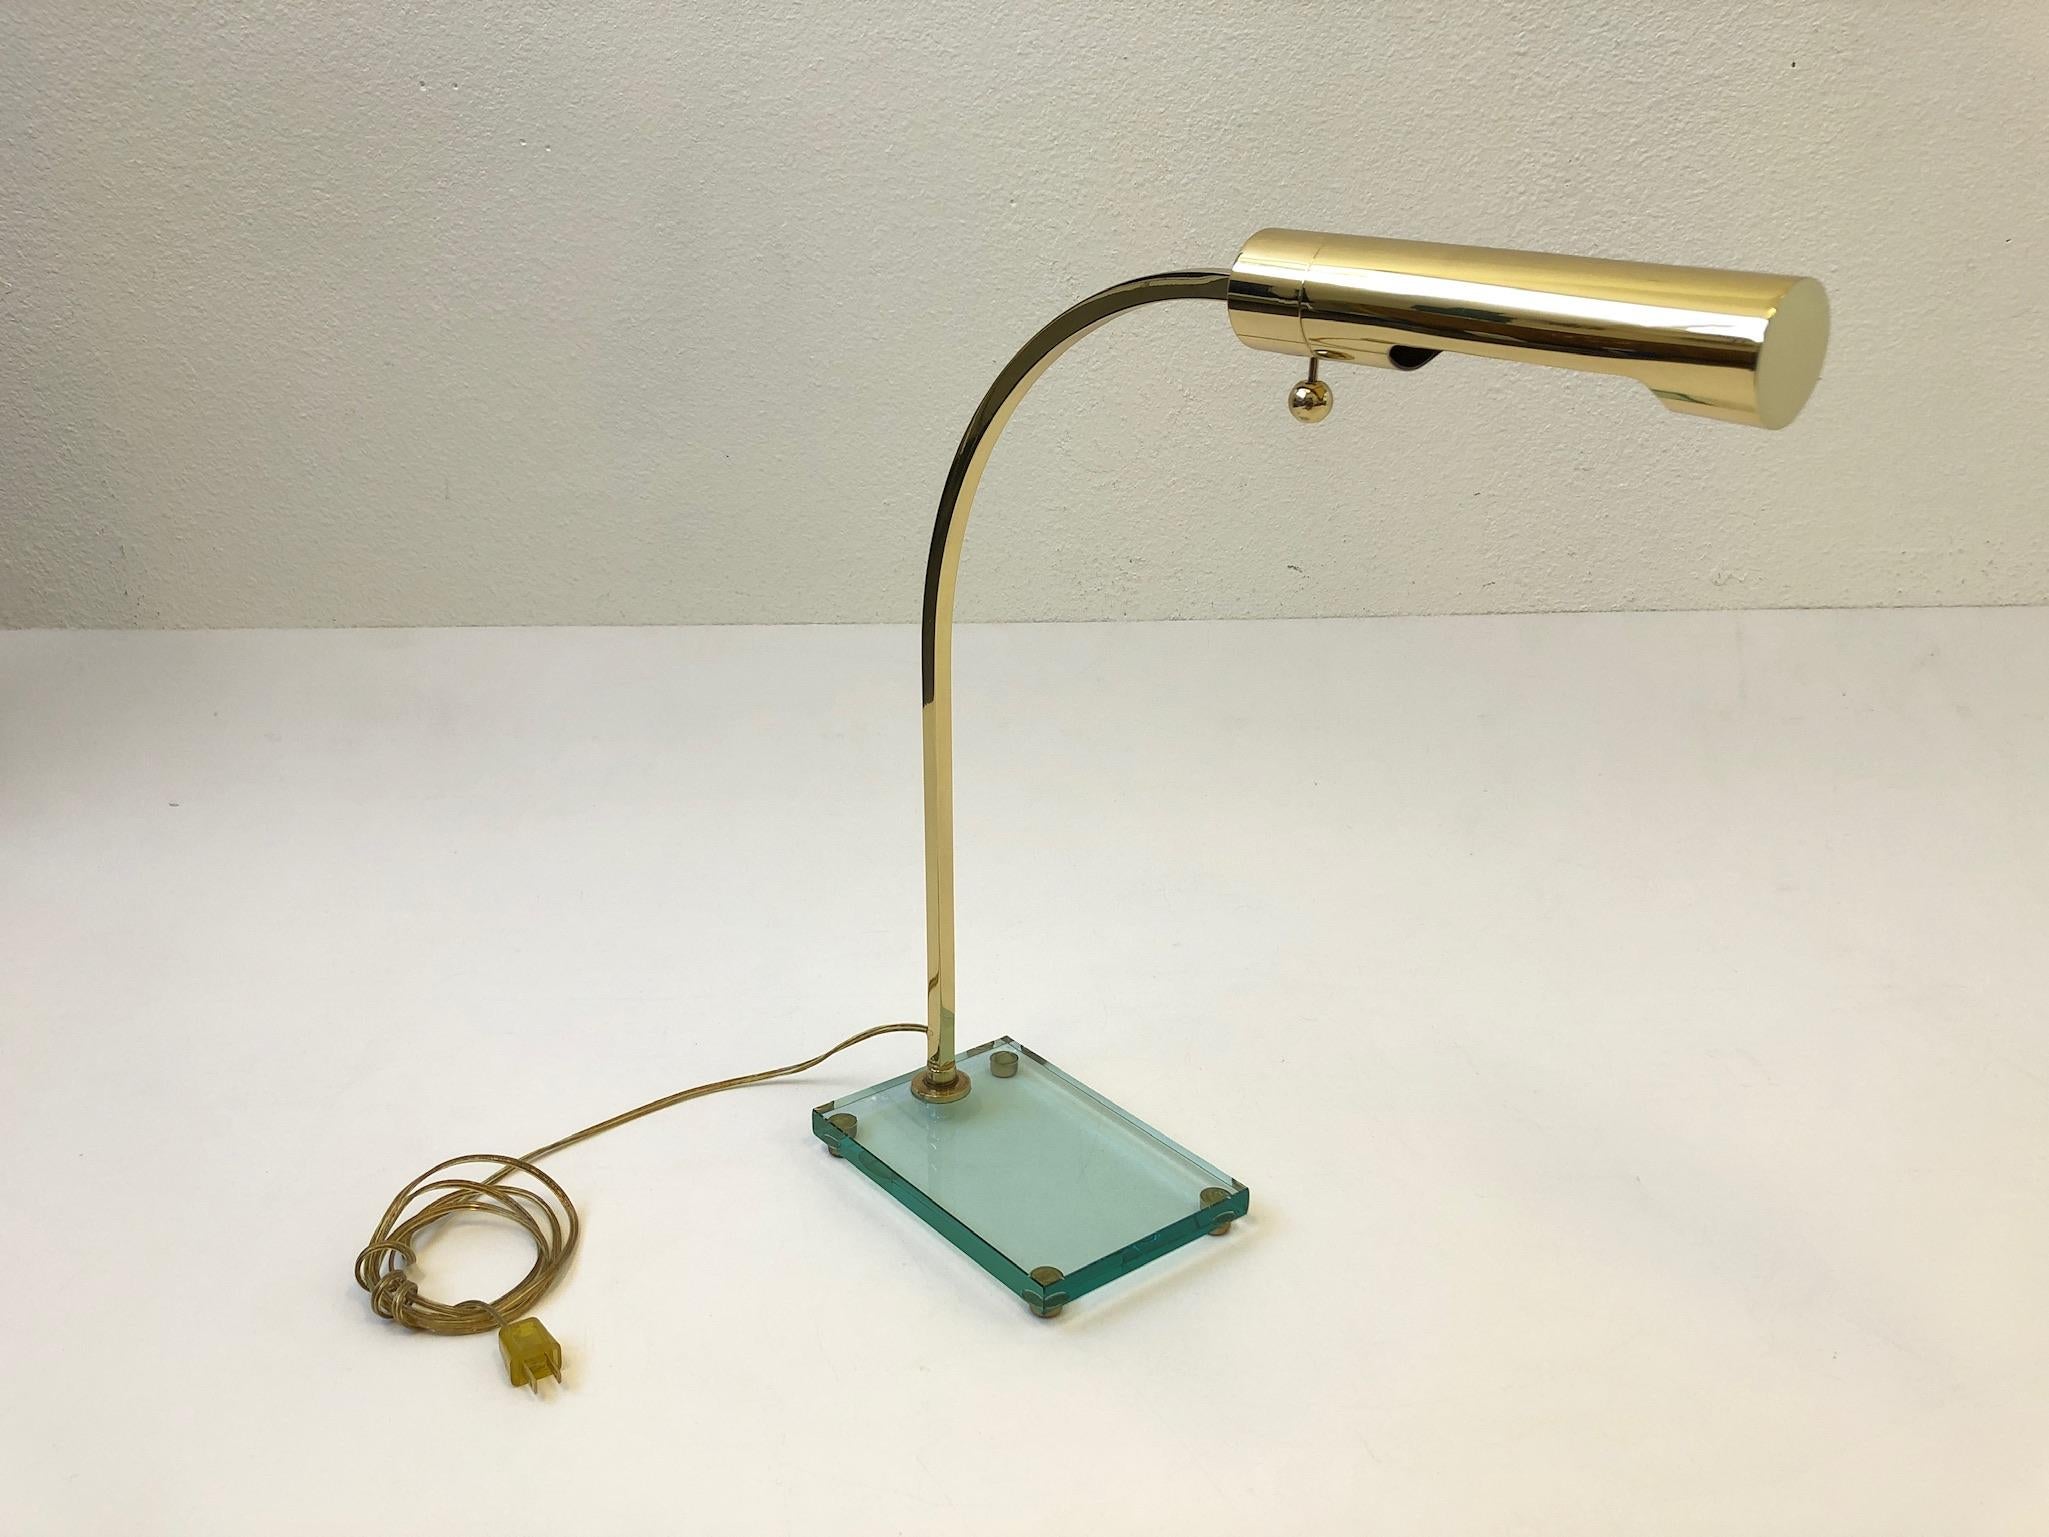 A glamorous 1970s polished brass with a glass base desk lamp in the style of Fontana Arte. The lamp has been newly rewired.
Dimensions: 20” Wide 6” Deep 22” High. 